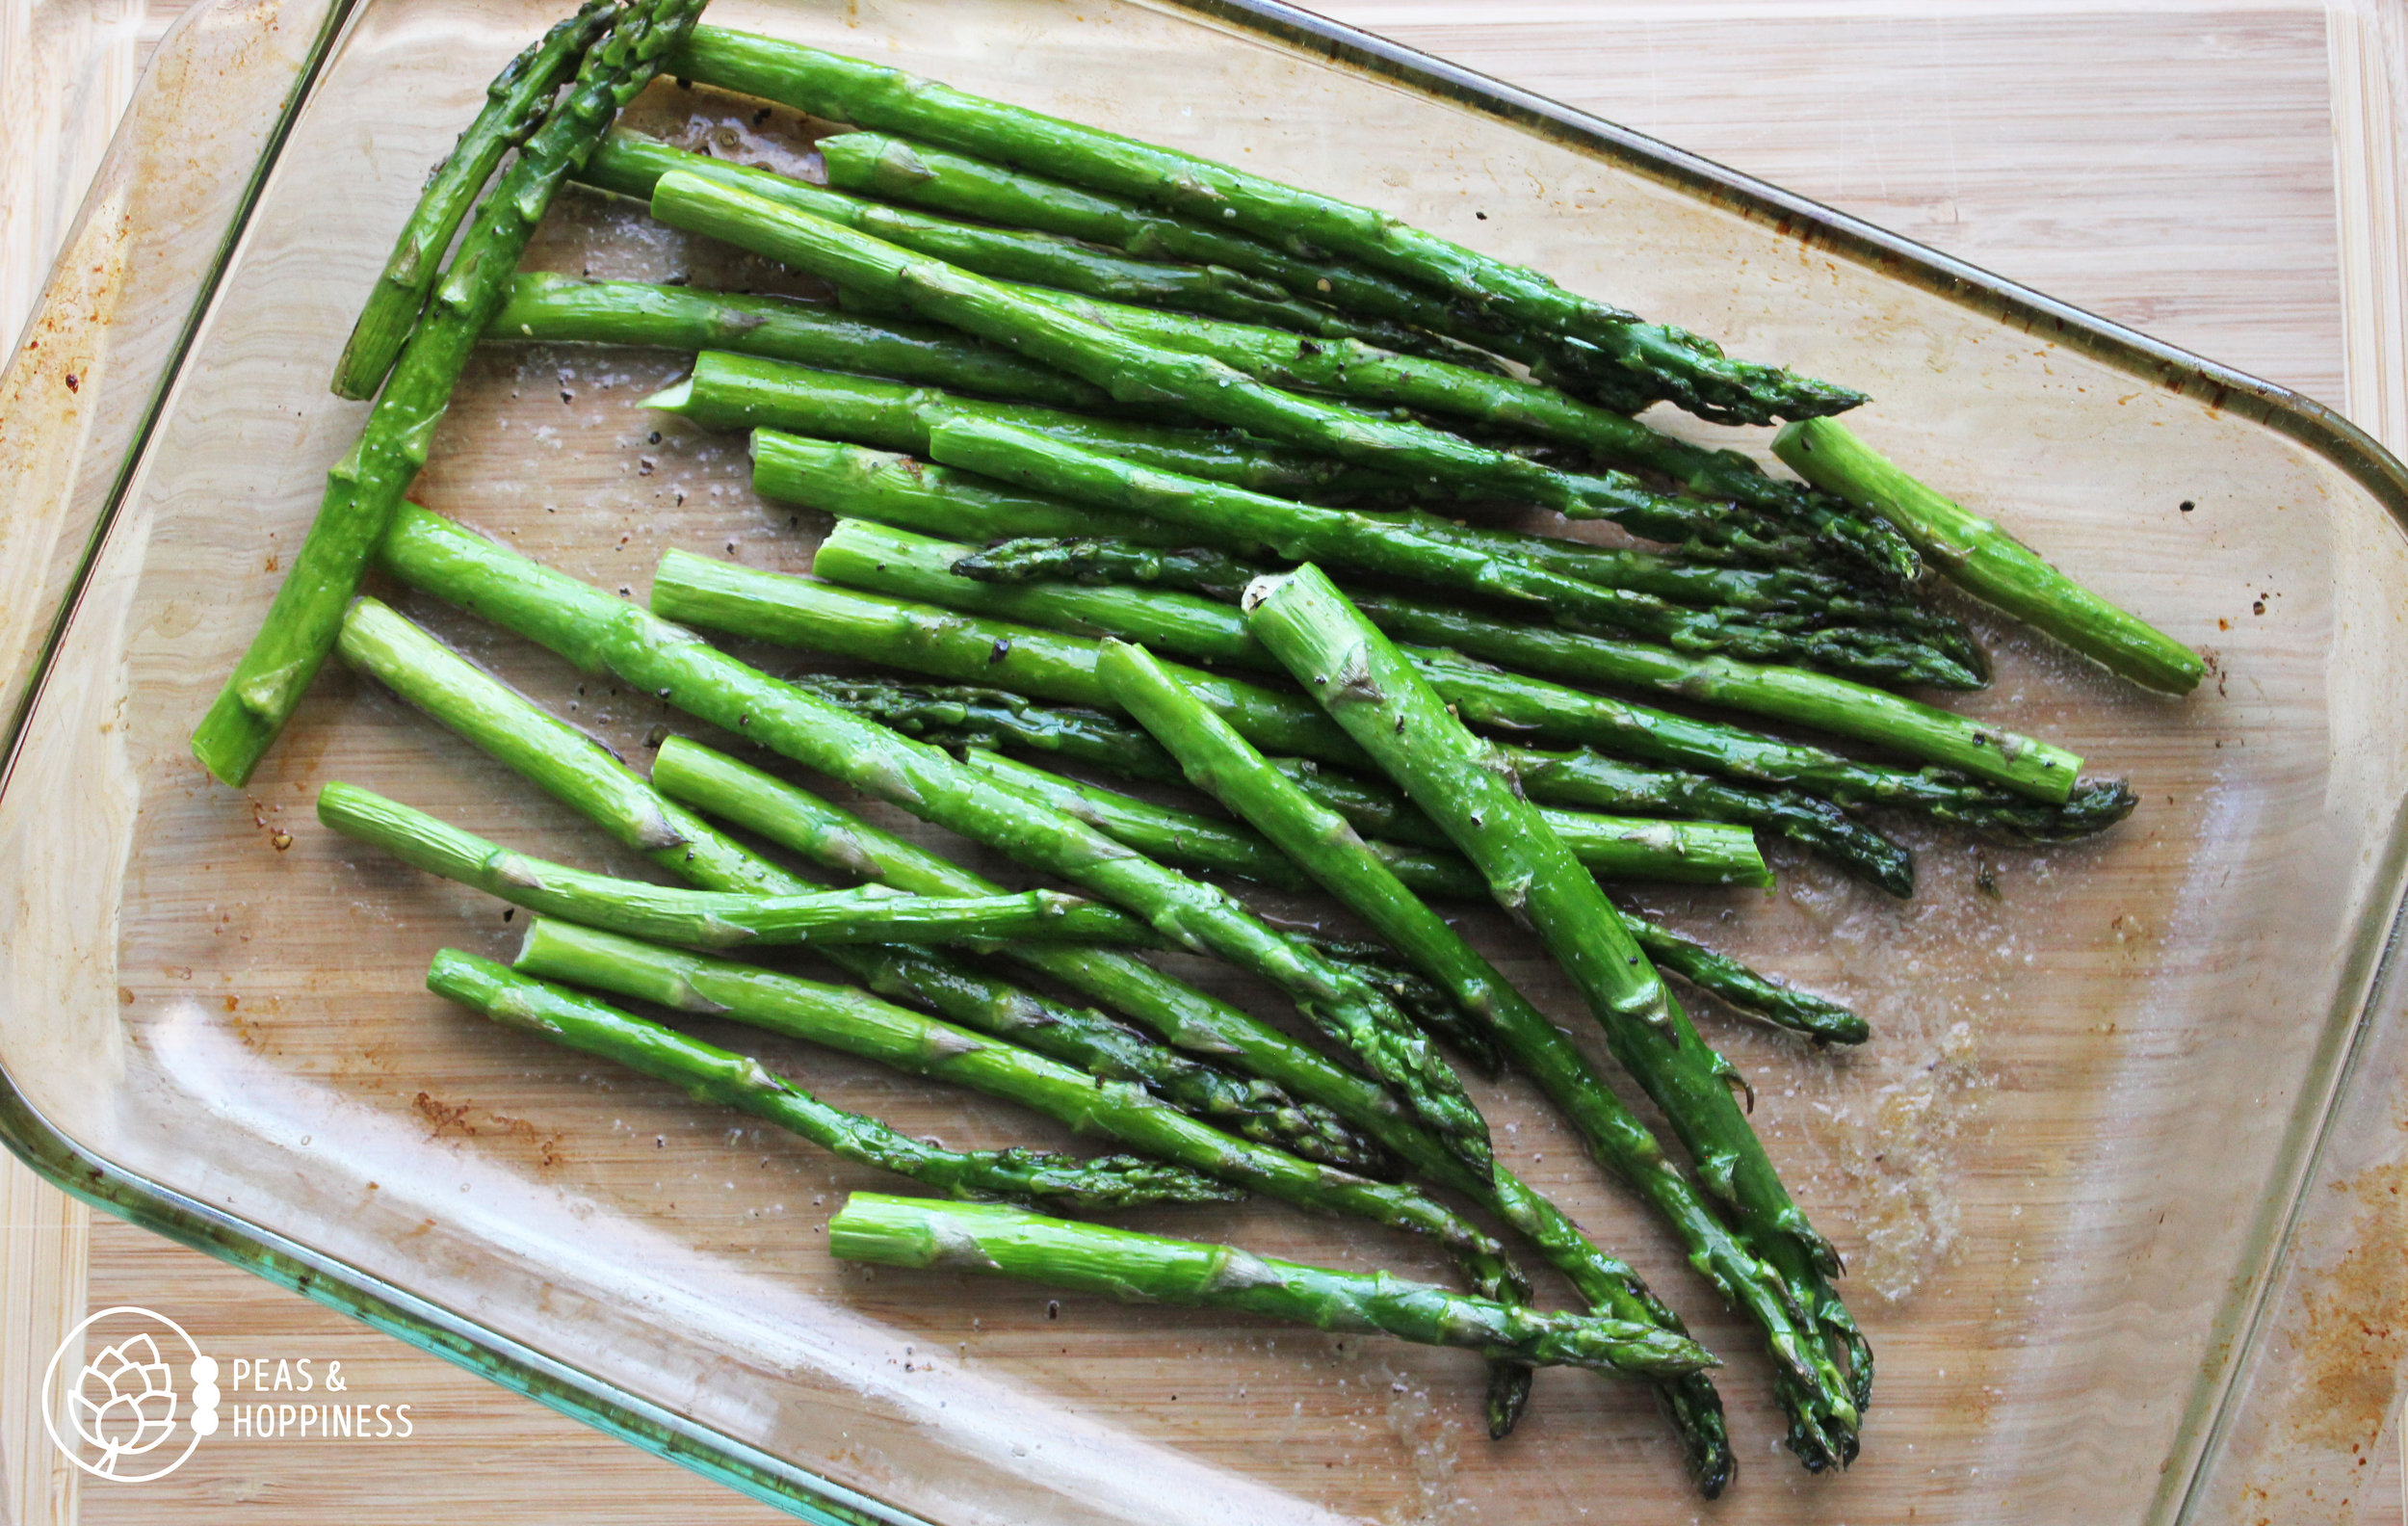 Roasted Asparagus. Who said low-carb isn't delicious?